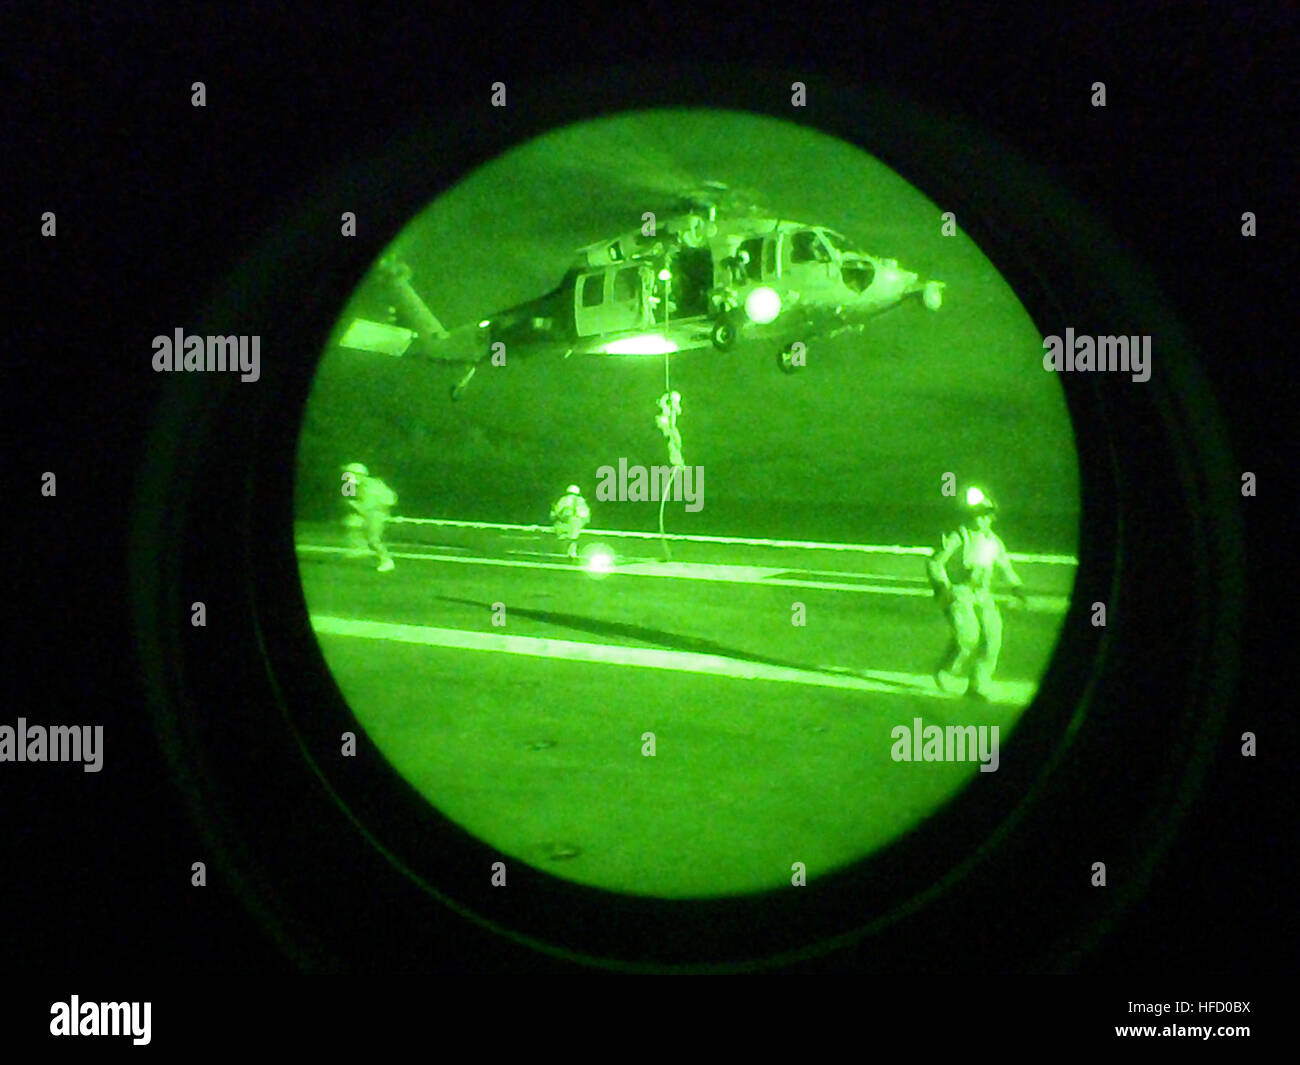 Use the EOD IR Line Laser while conducting NVG operations.